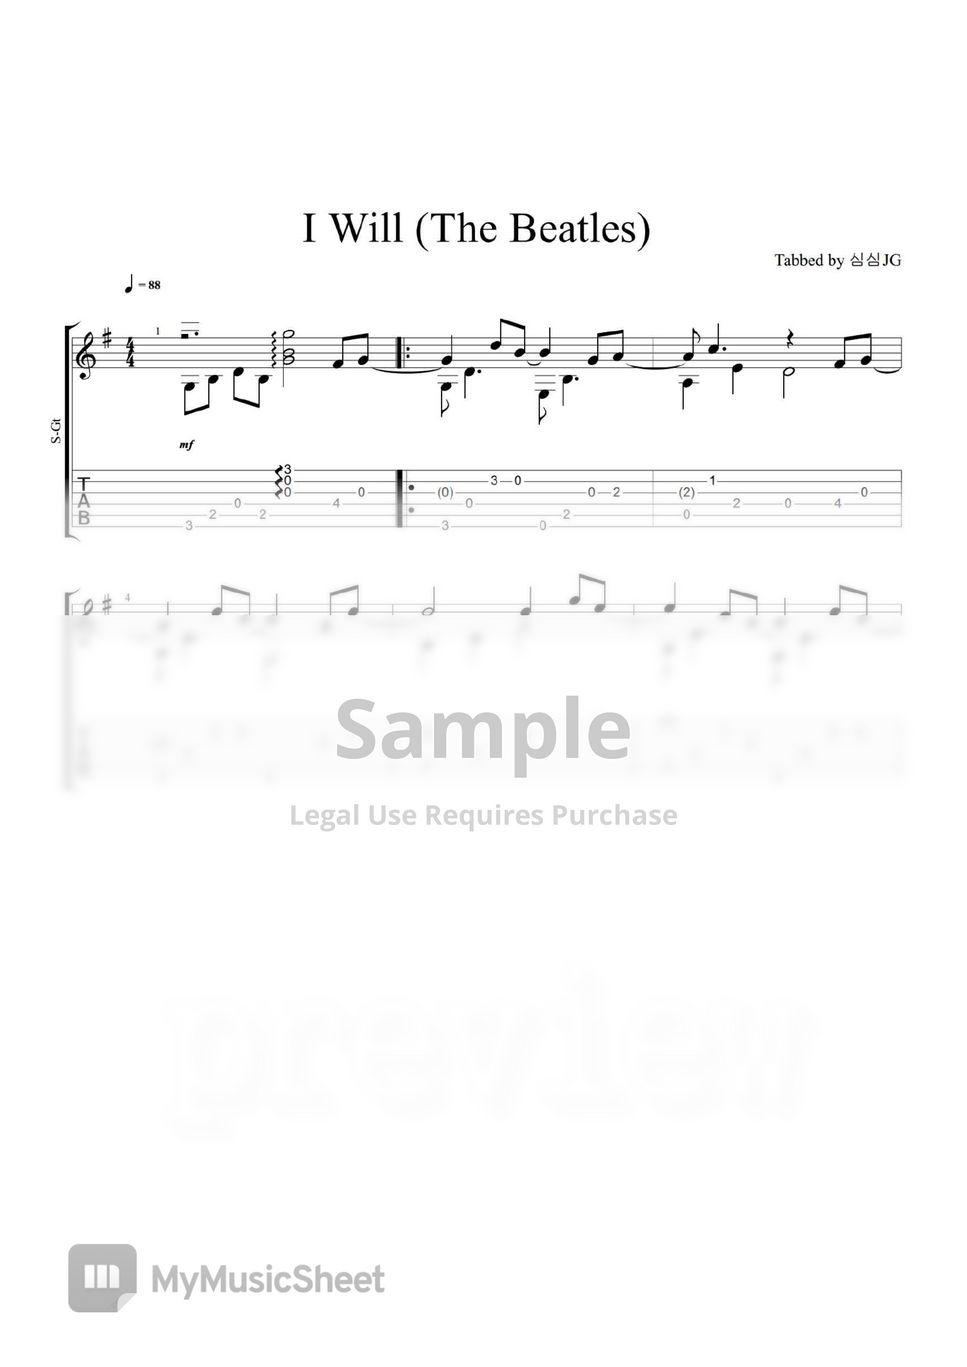 The Beatles - I will by 심심JG